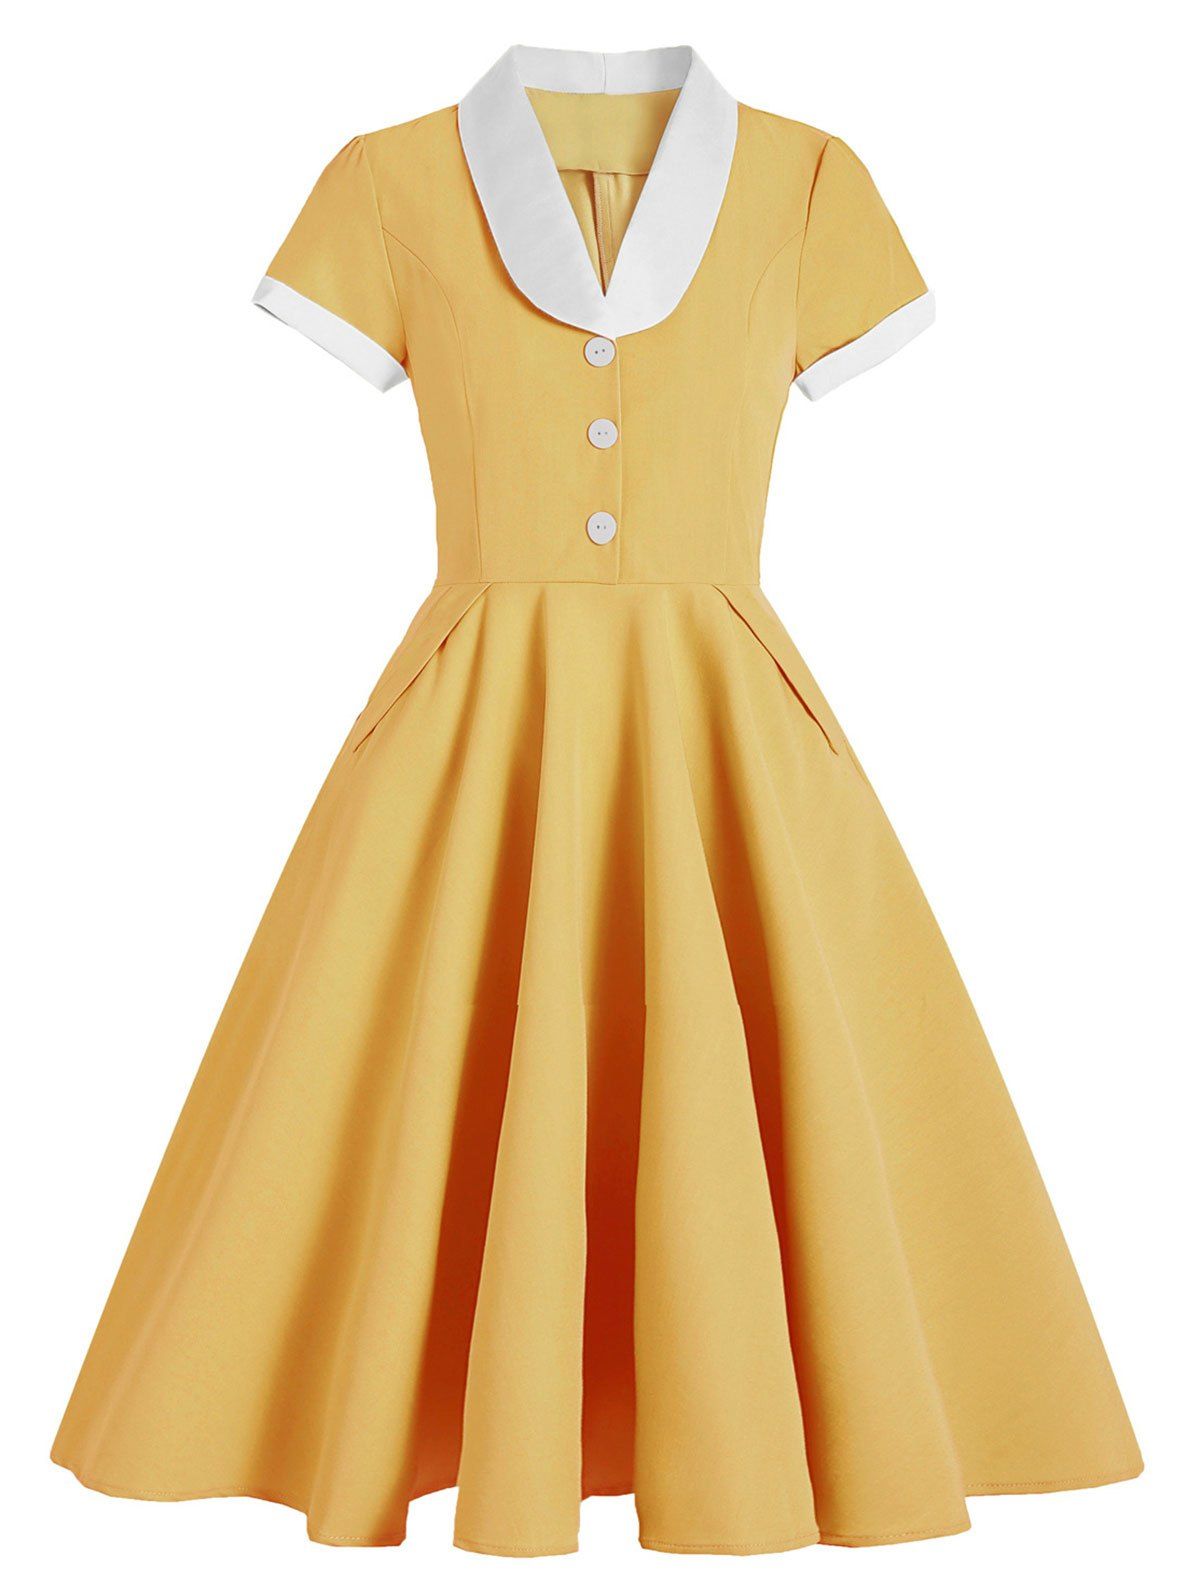 Colorblock Mock Button Rolled Cuff Pocket Dress - YELLOW L